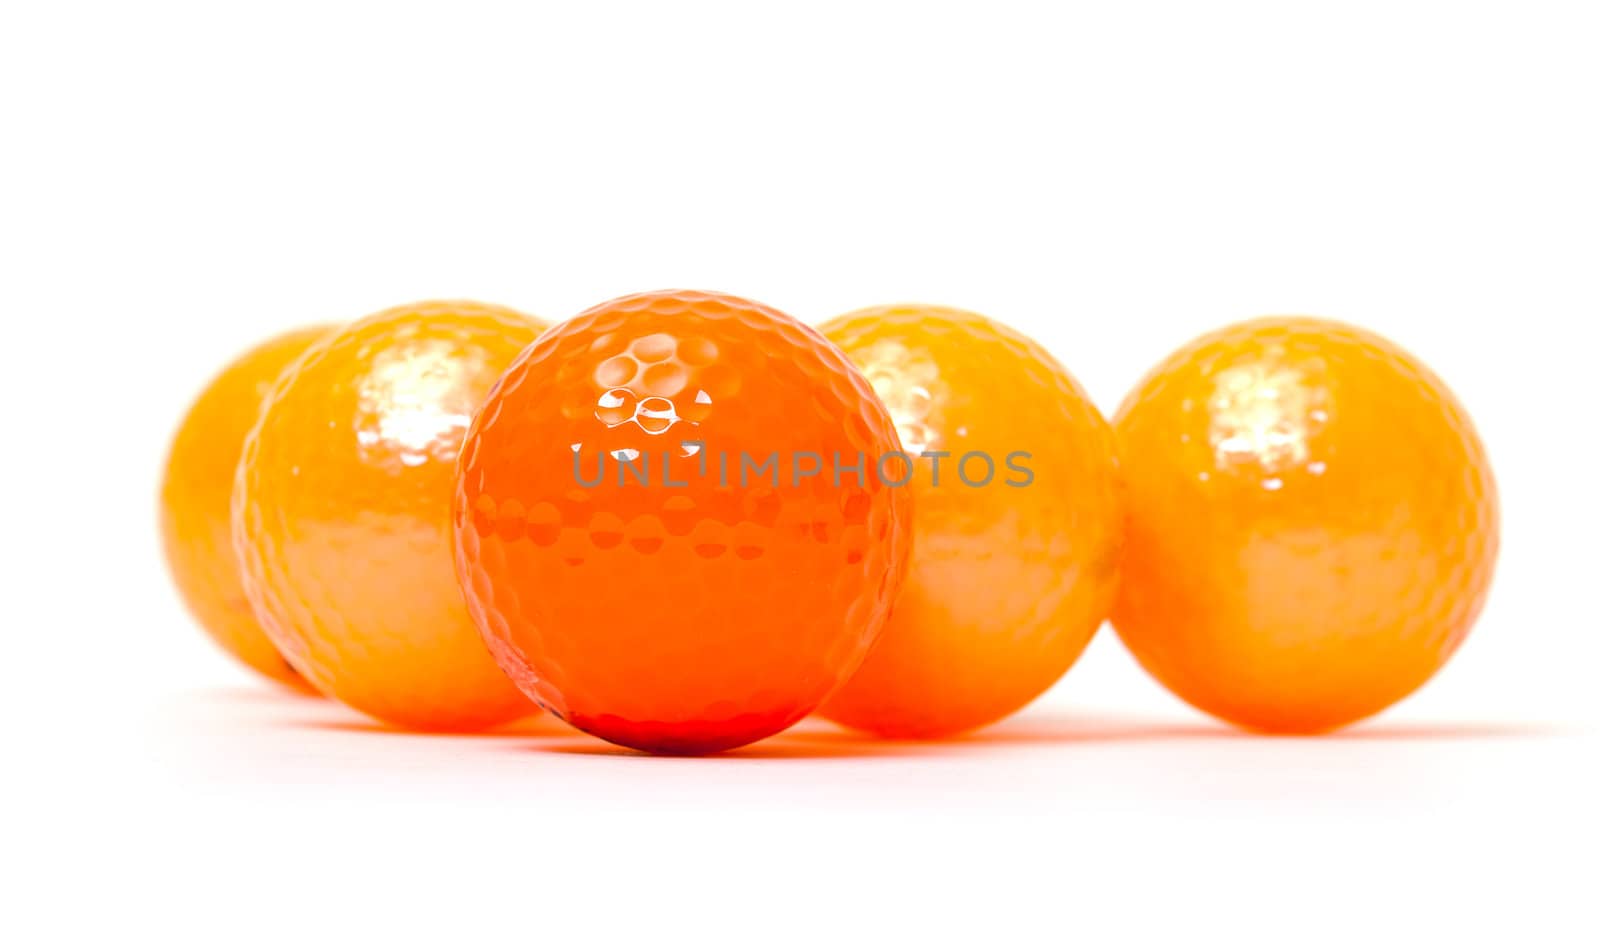 Orange and golden golf balls by Discovod